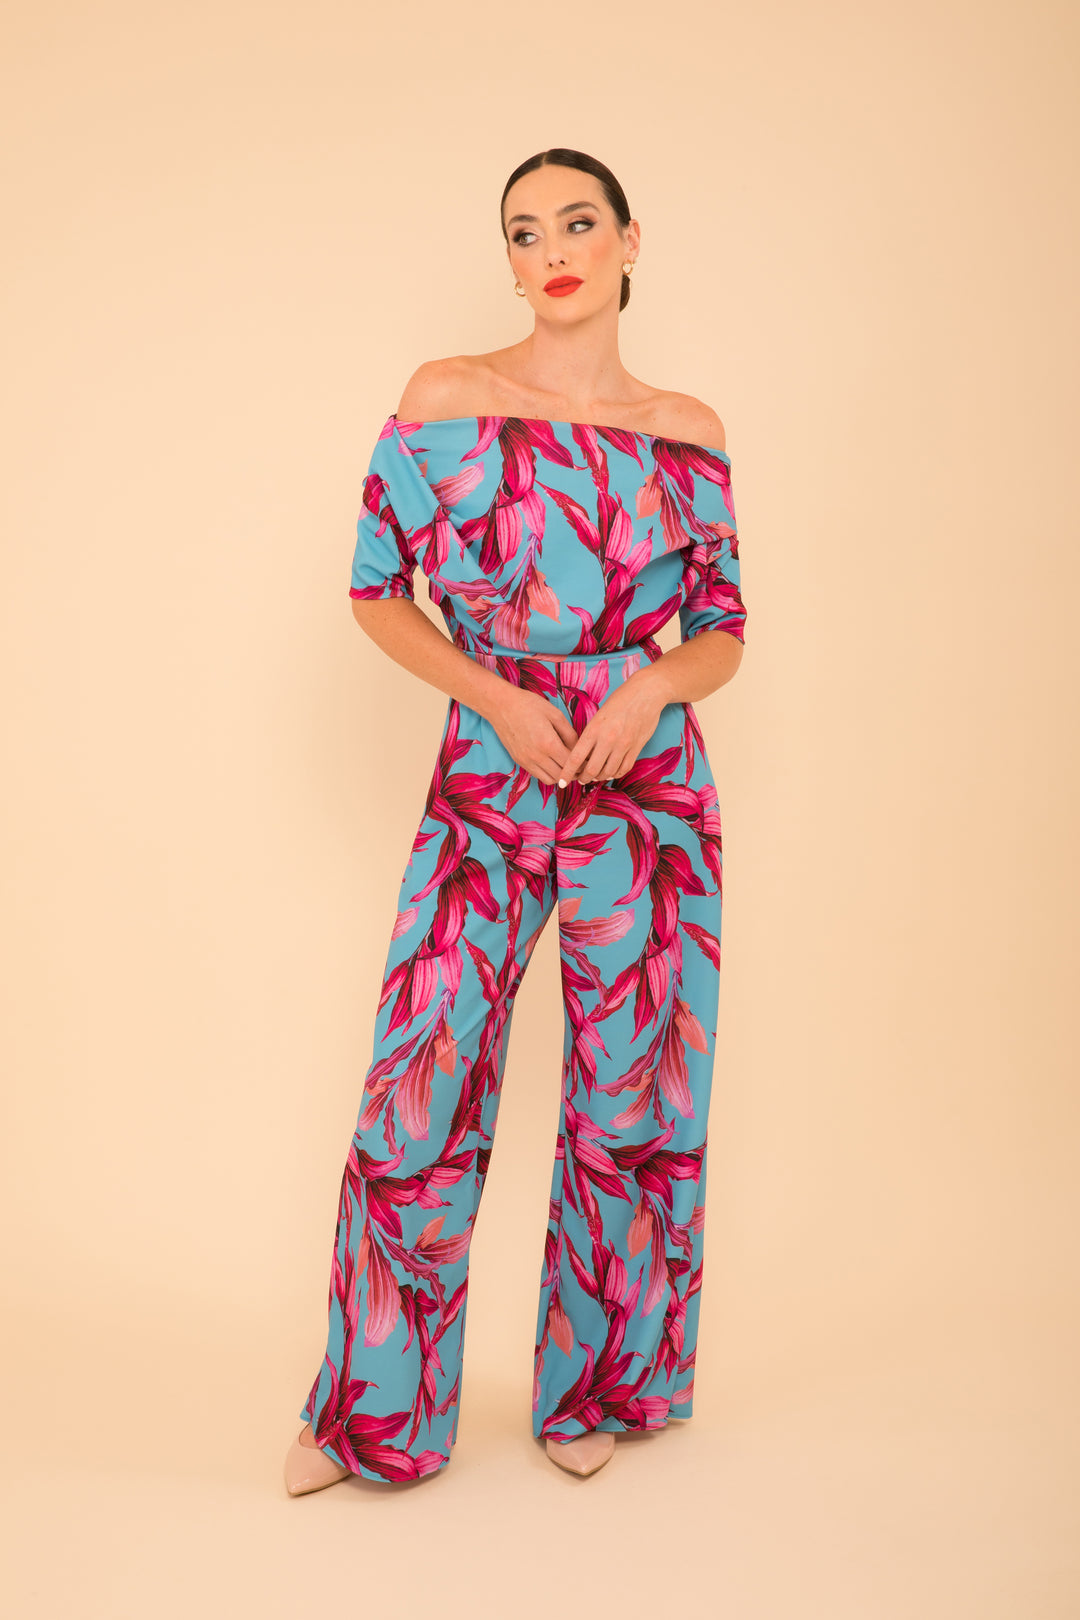 ATOM LABEL lima jumpsuit in turquoise & magenta lily print